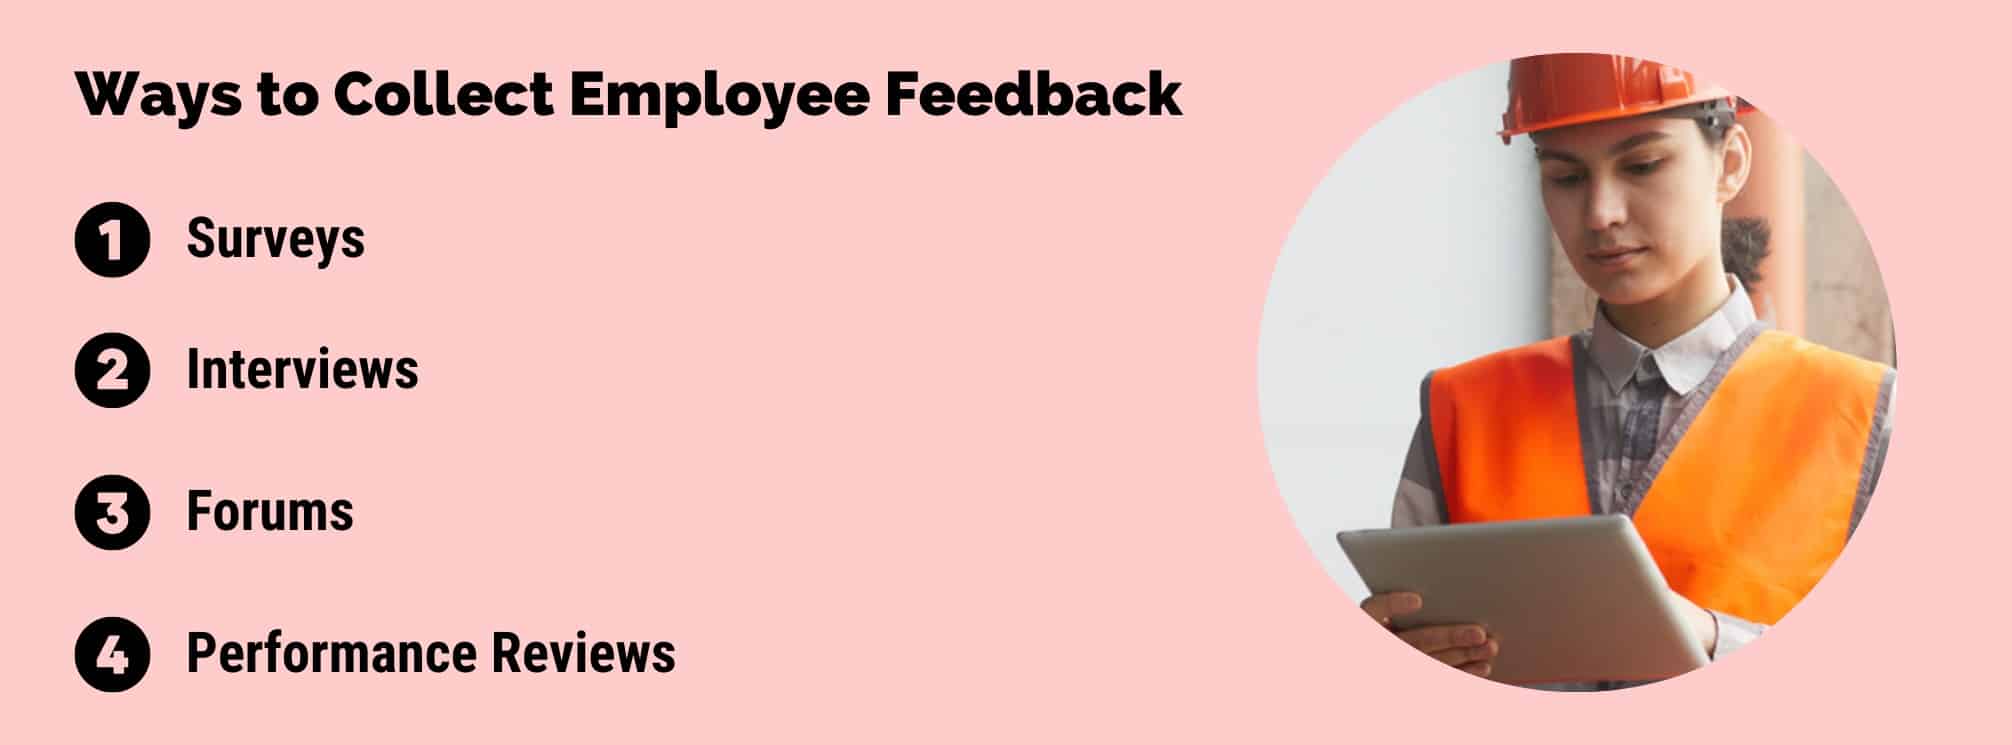 graphic with a frontline worker taking a survey on an ipad with the text "ways to collect employee feedback, 1. surveys, 2. interviews, 3. forums, 4. performance reviews"